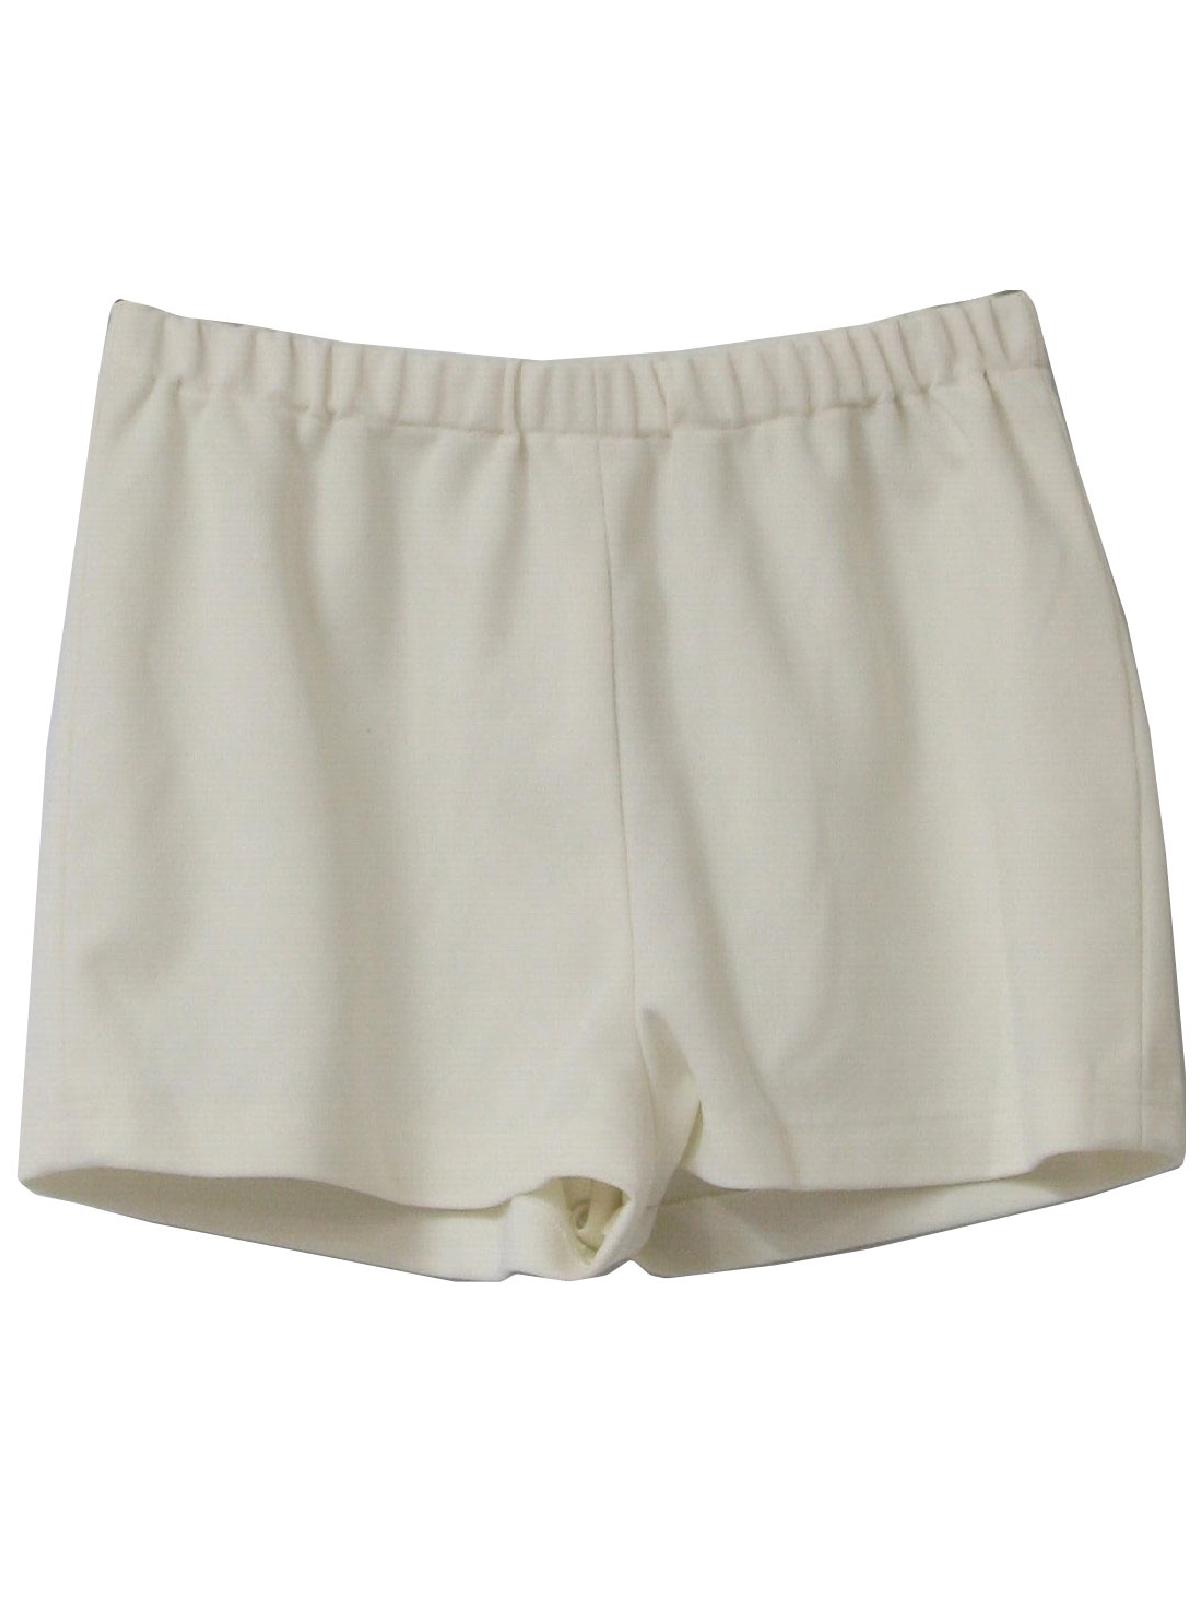 1970's Shorts (Missing Label): 70s -Missing Label- Mens white double ...